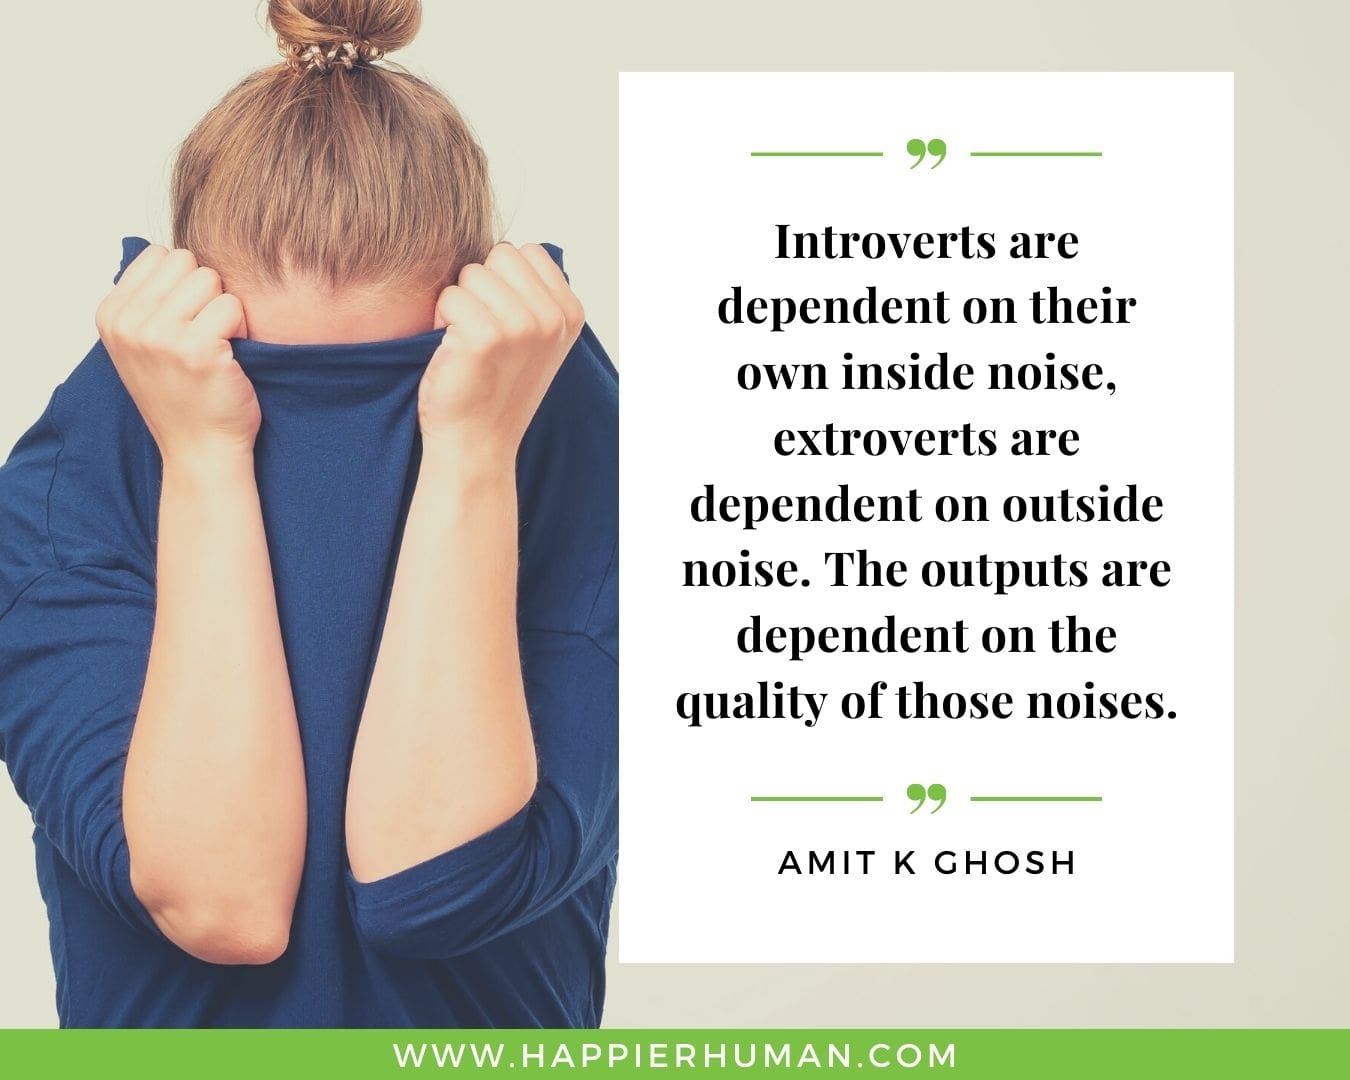 Introvert Quotes - “Introverts are dependent on their own inside noise, extroverts are dependent on outside noise. The outputs are dependent on the quality of those noises.” – Amit K Ghosh